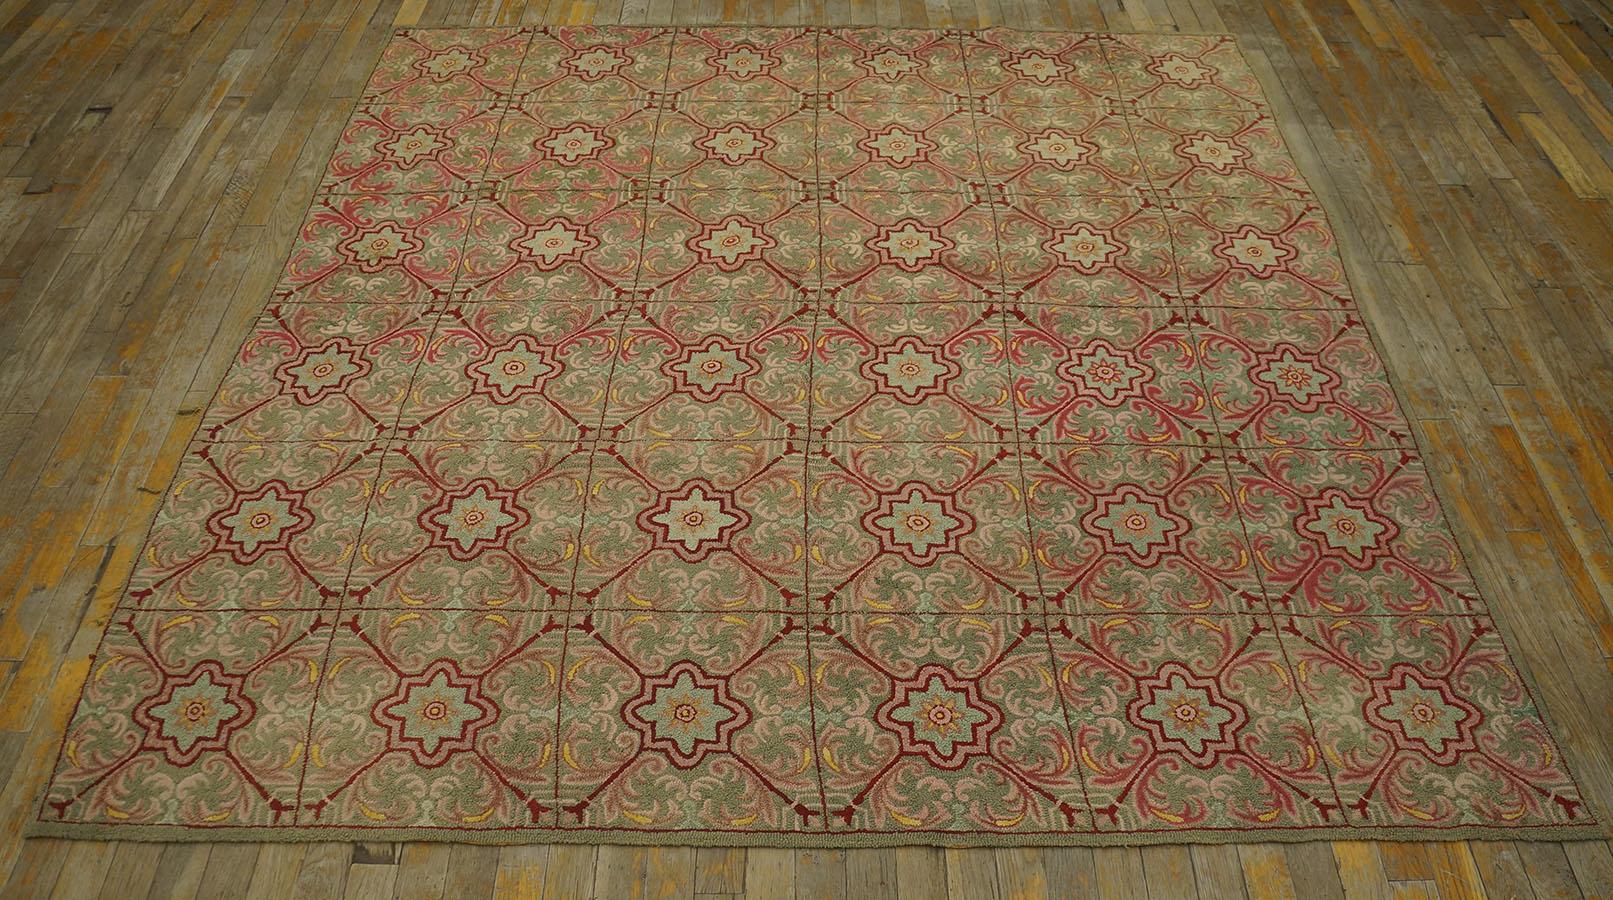 Antique American Hooked rug, size: 6' 4''x6' 4''.